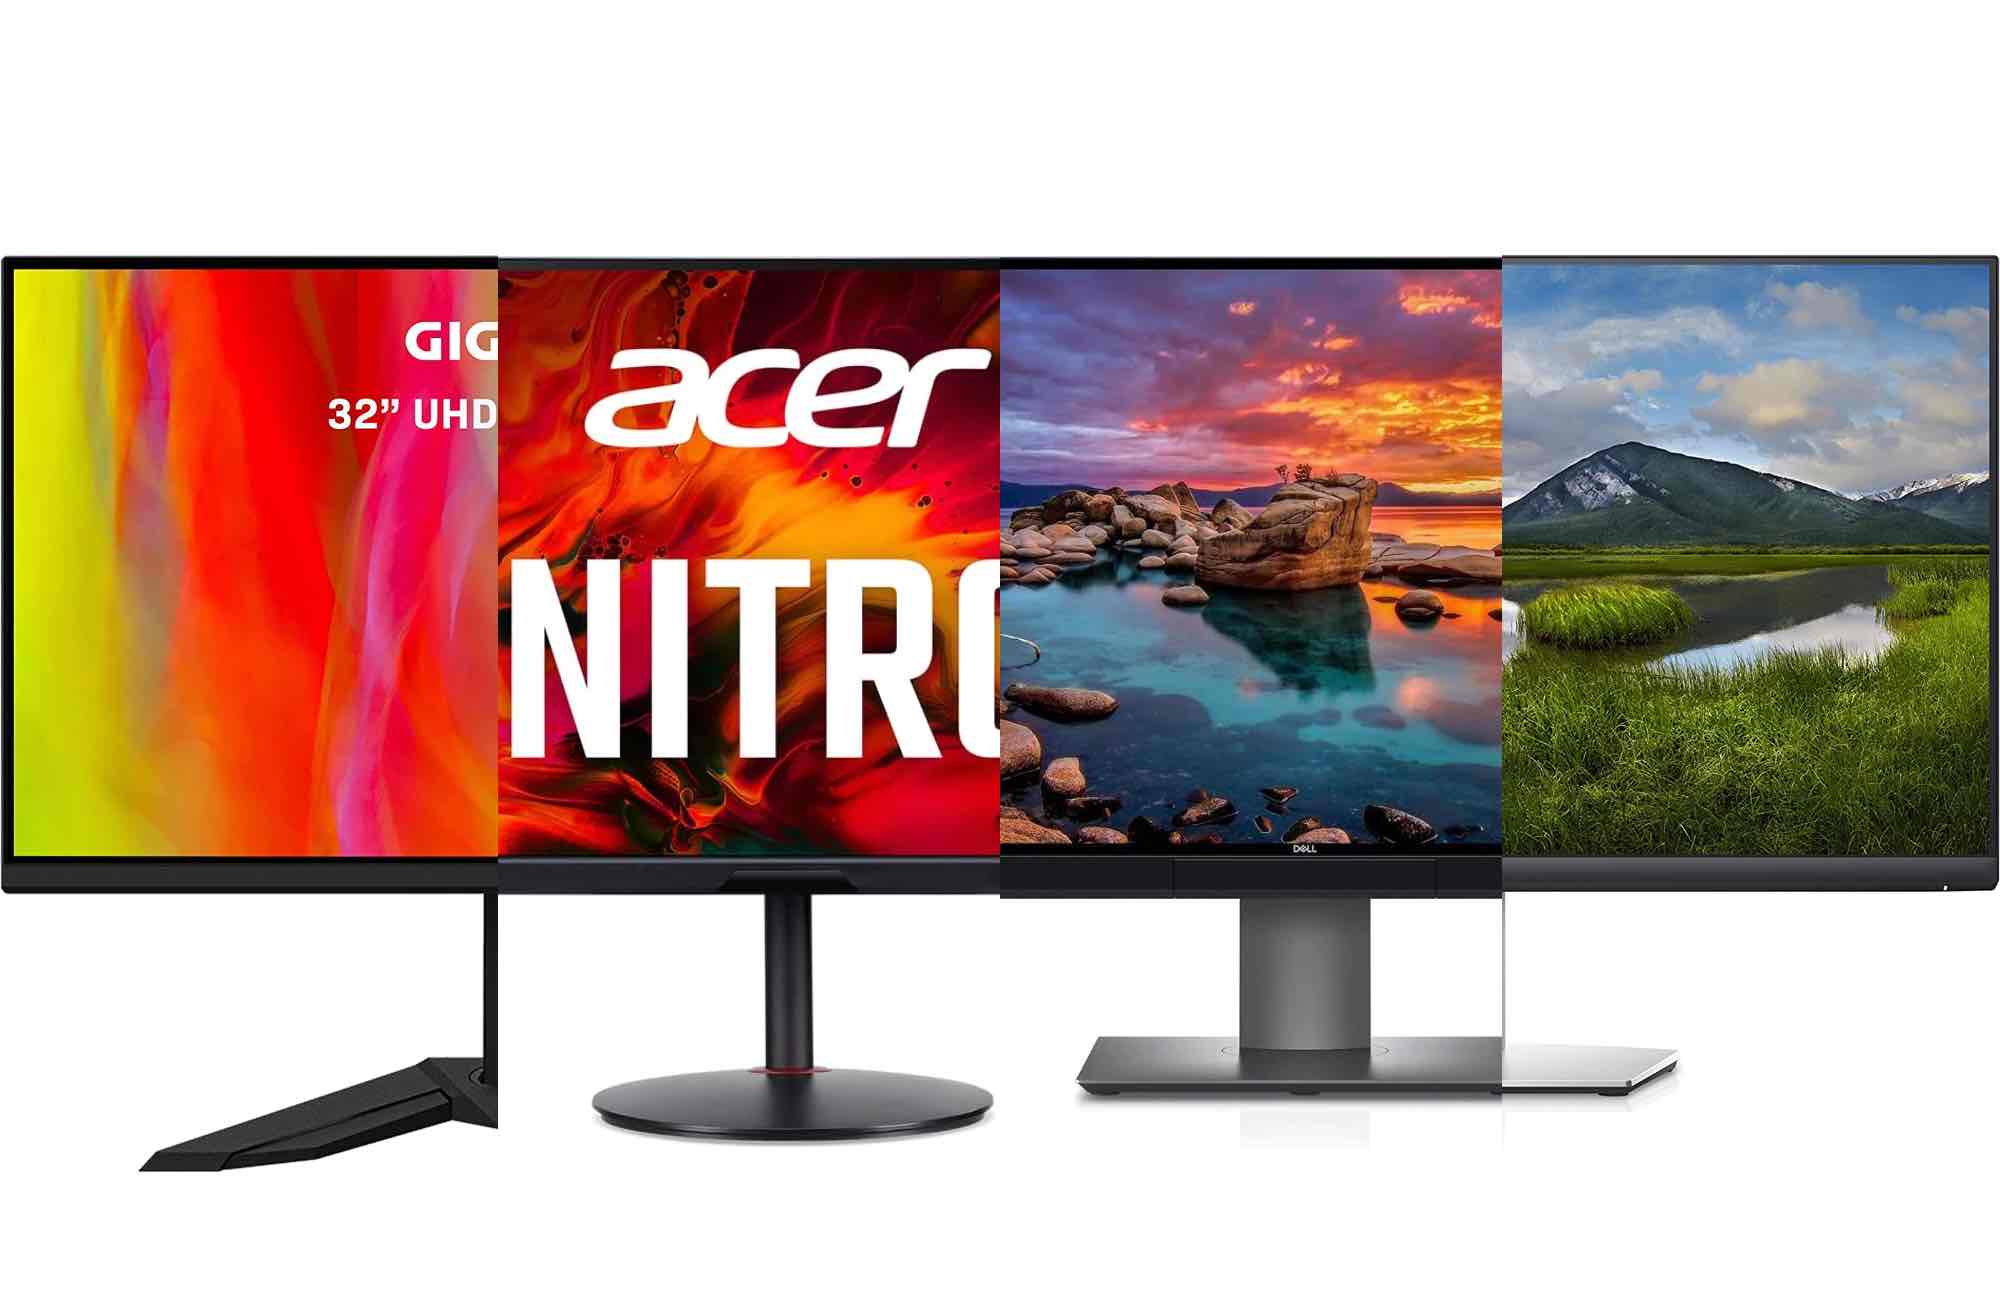 This 32-inch 4K monitor just had its price slashed by 21